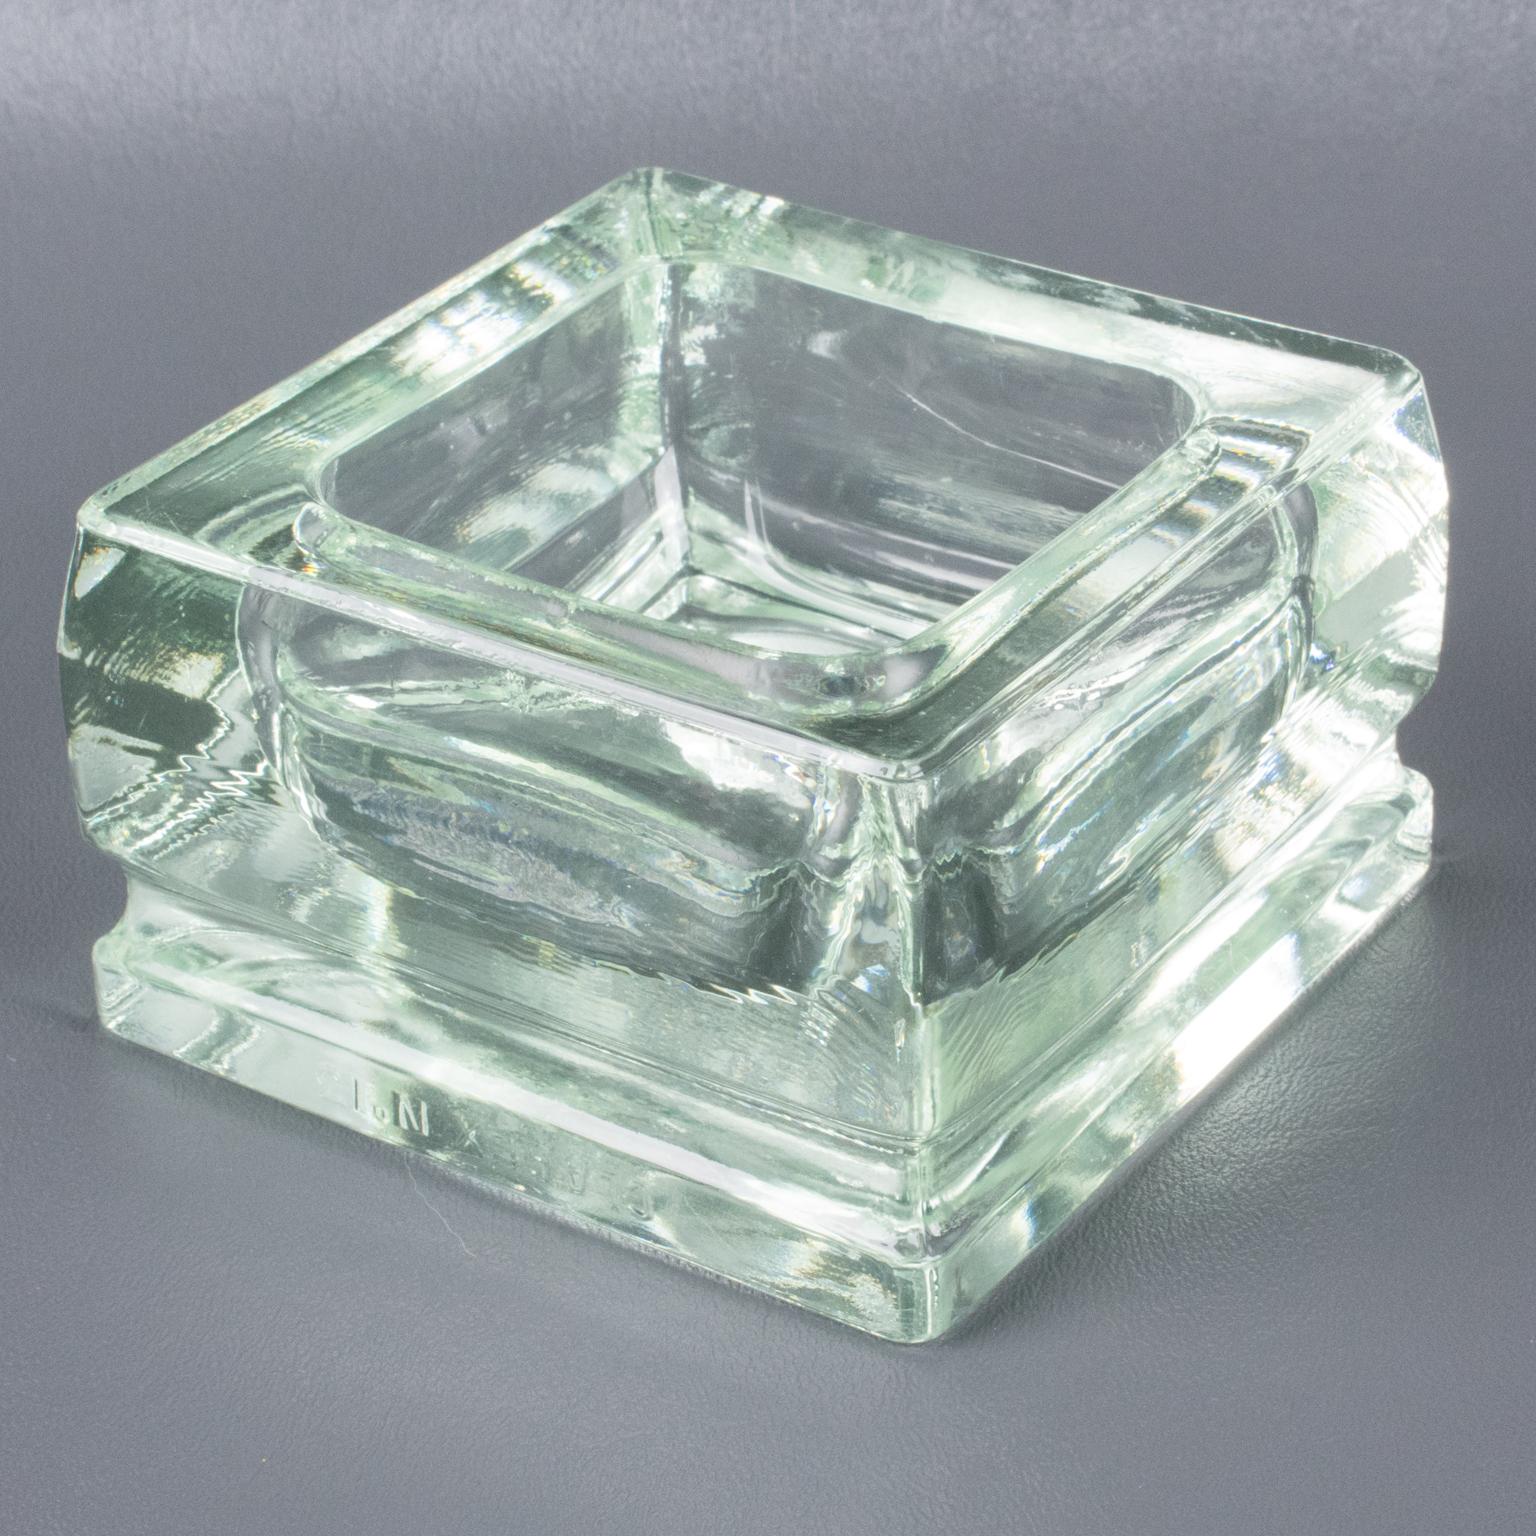 Industrial thick molded glass desktop accessory catchall, or desk tidy or ashtray manufactured by Lumax, France. Original design by Le Corbusier. Engraved marking on the side reads 